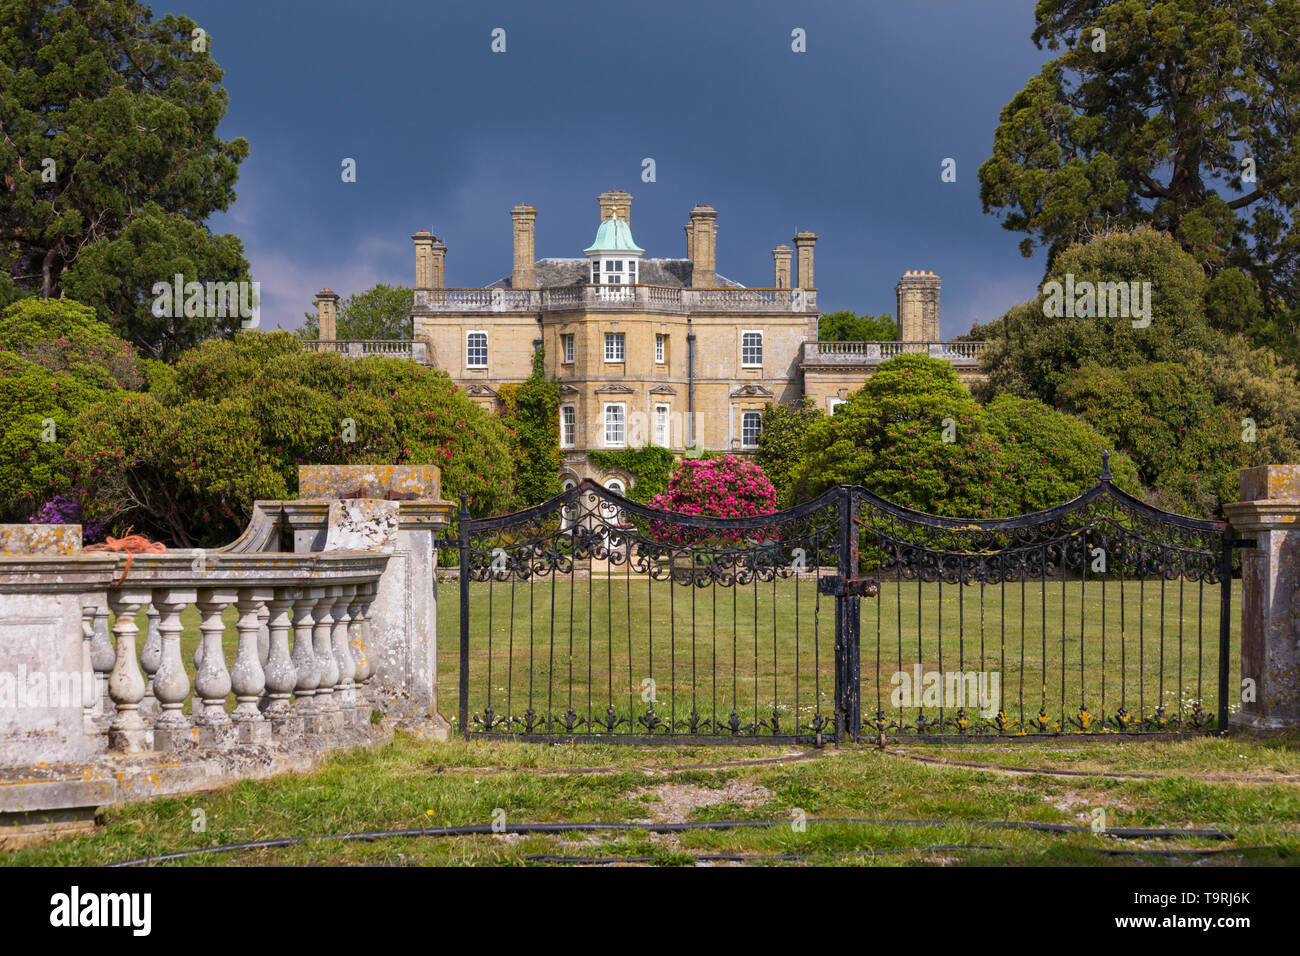 Dramatic lighting over Pylewell House, Pylewell Park Estate, Lymington, New Forest, Hampshire, UK in May Stock Photo